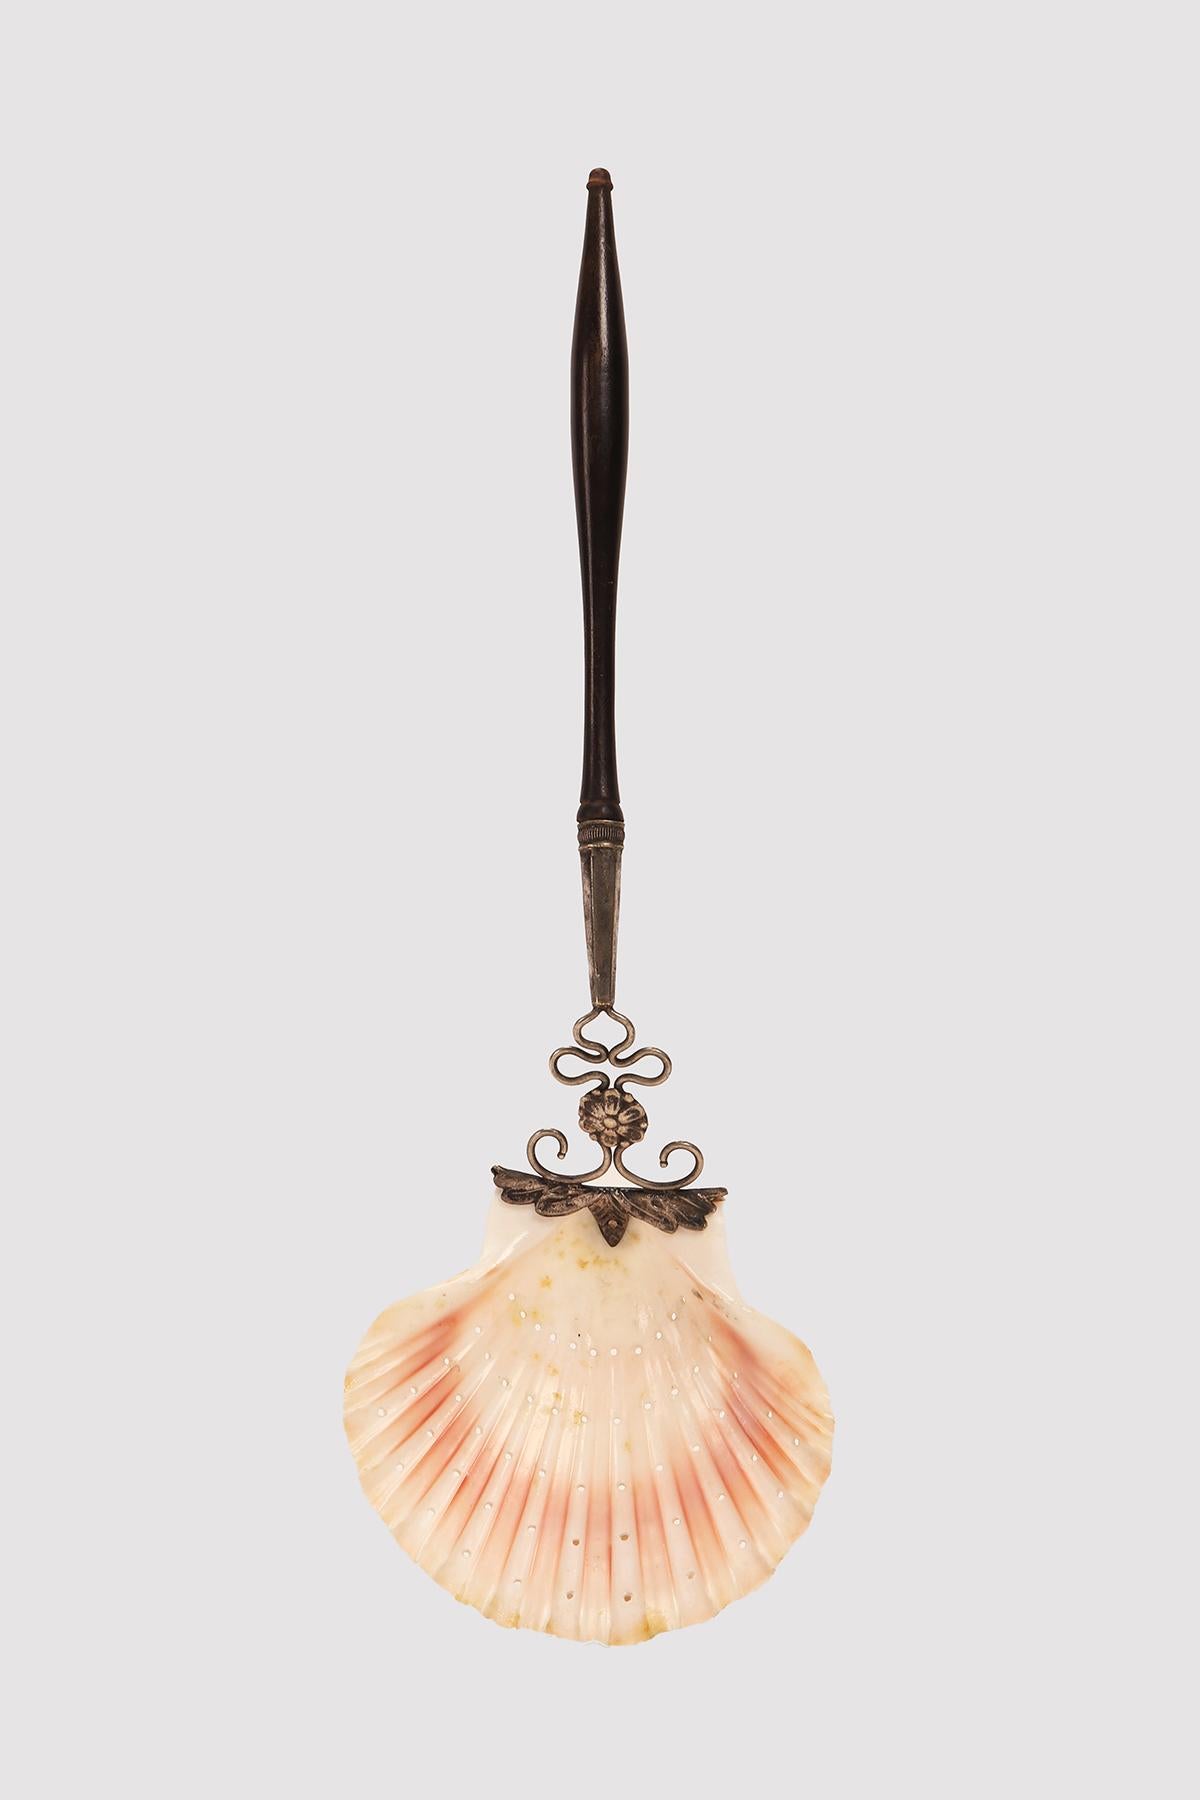 Sugar sprinkler made from a perforated St. James shell, attached to the waxed rosewood handle, with a silver floral pattern graft.
Italy, circa 1870.
 